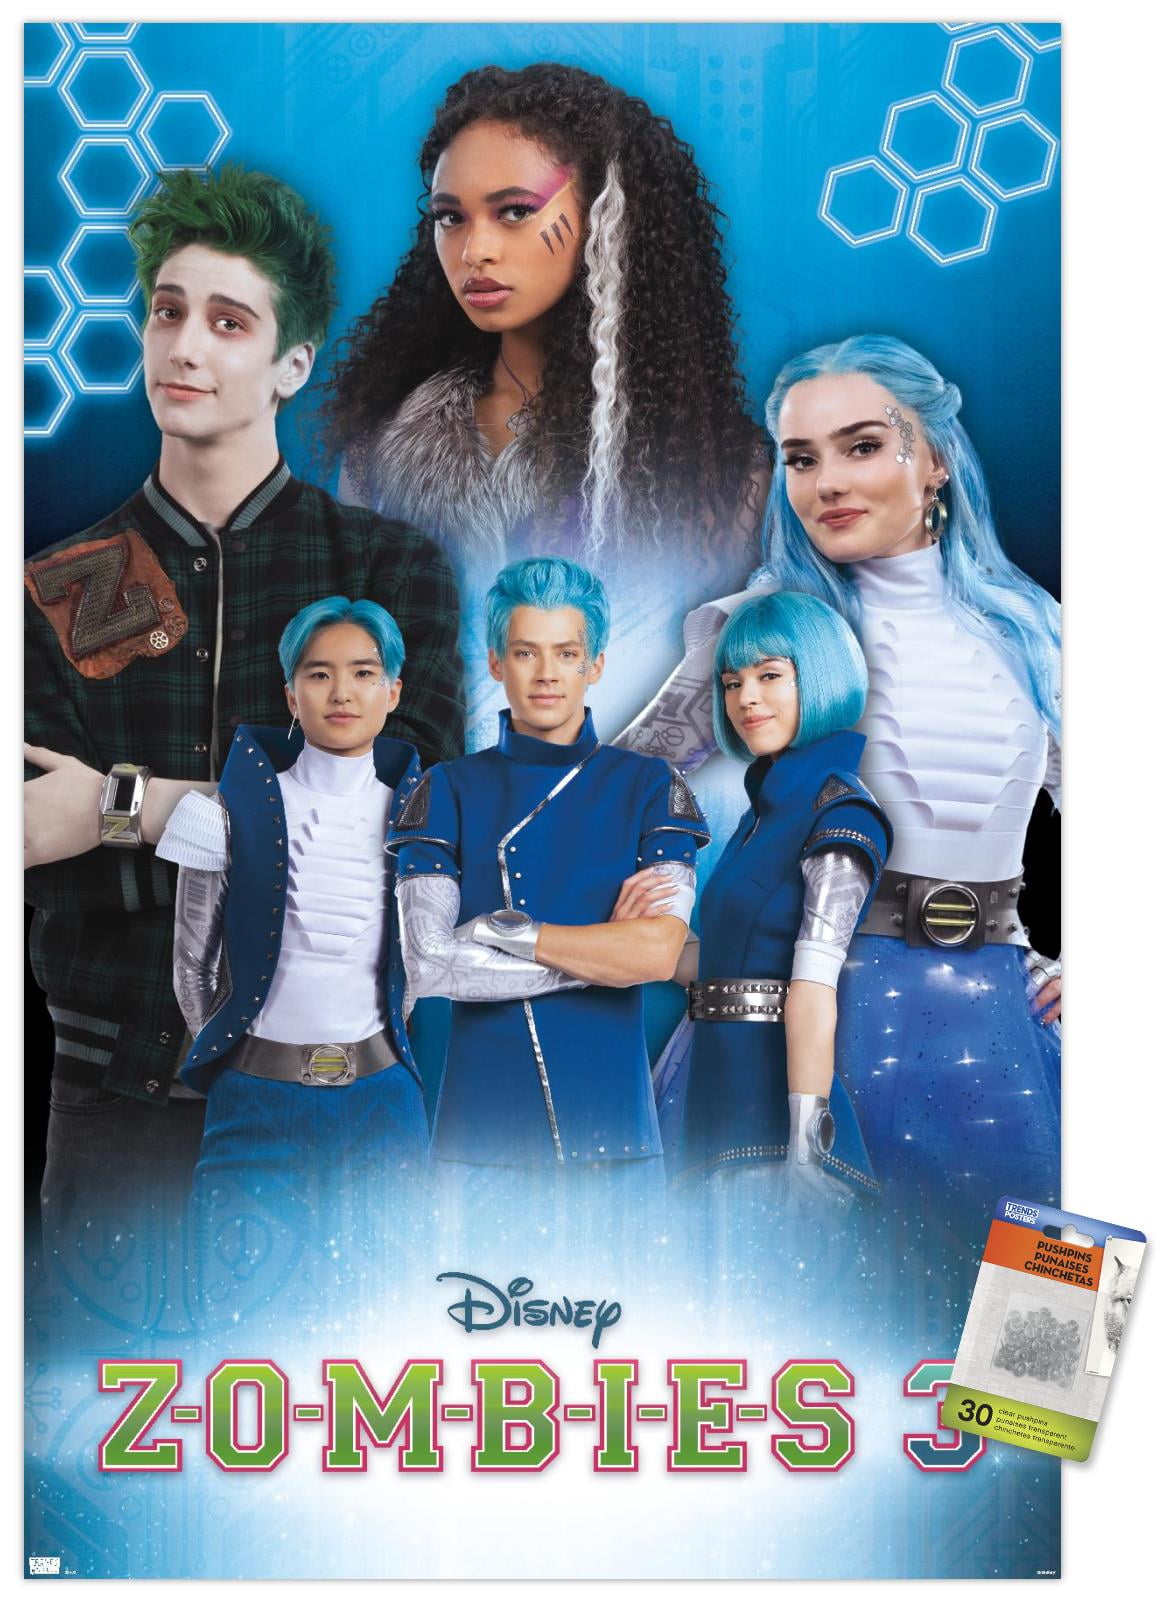 Disney Descendants 3 - Grid Wall Poster with Push Pins, 22.375 x 34